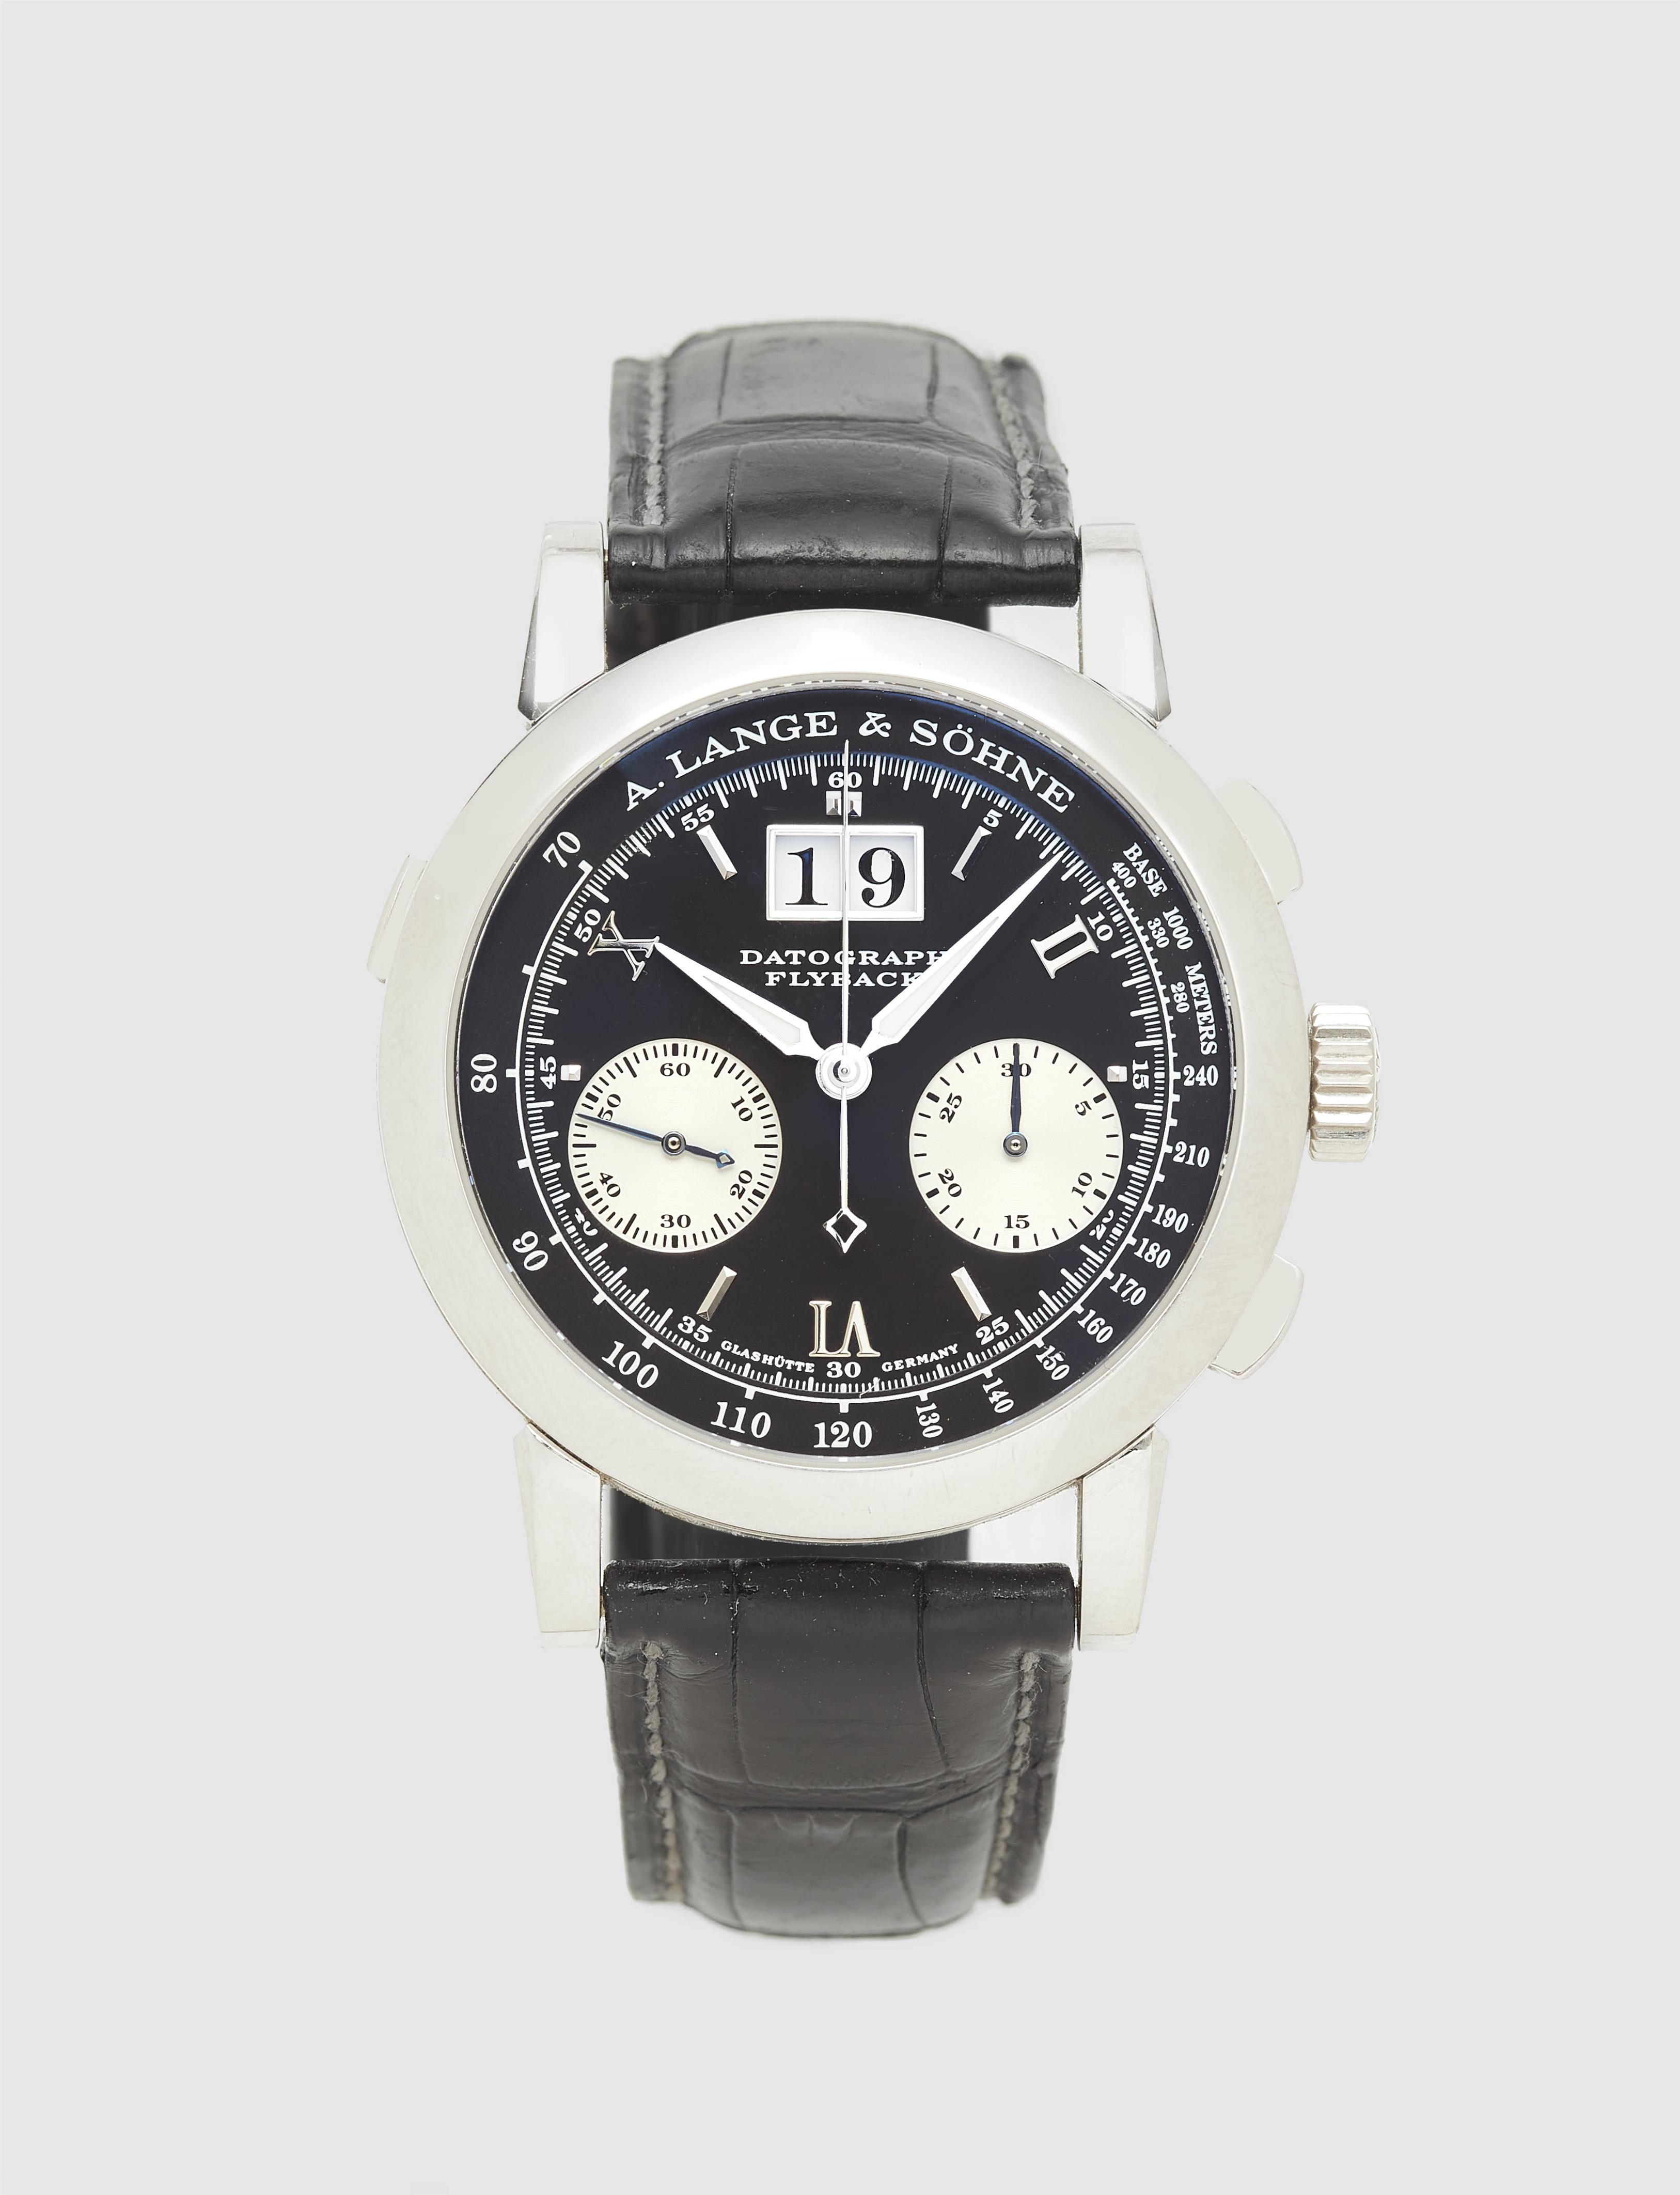 A. Lange & Söhne Datograph Flyback Chronograph - image-1